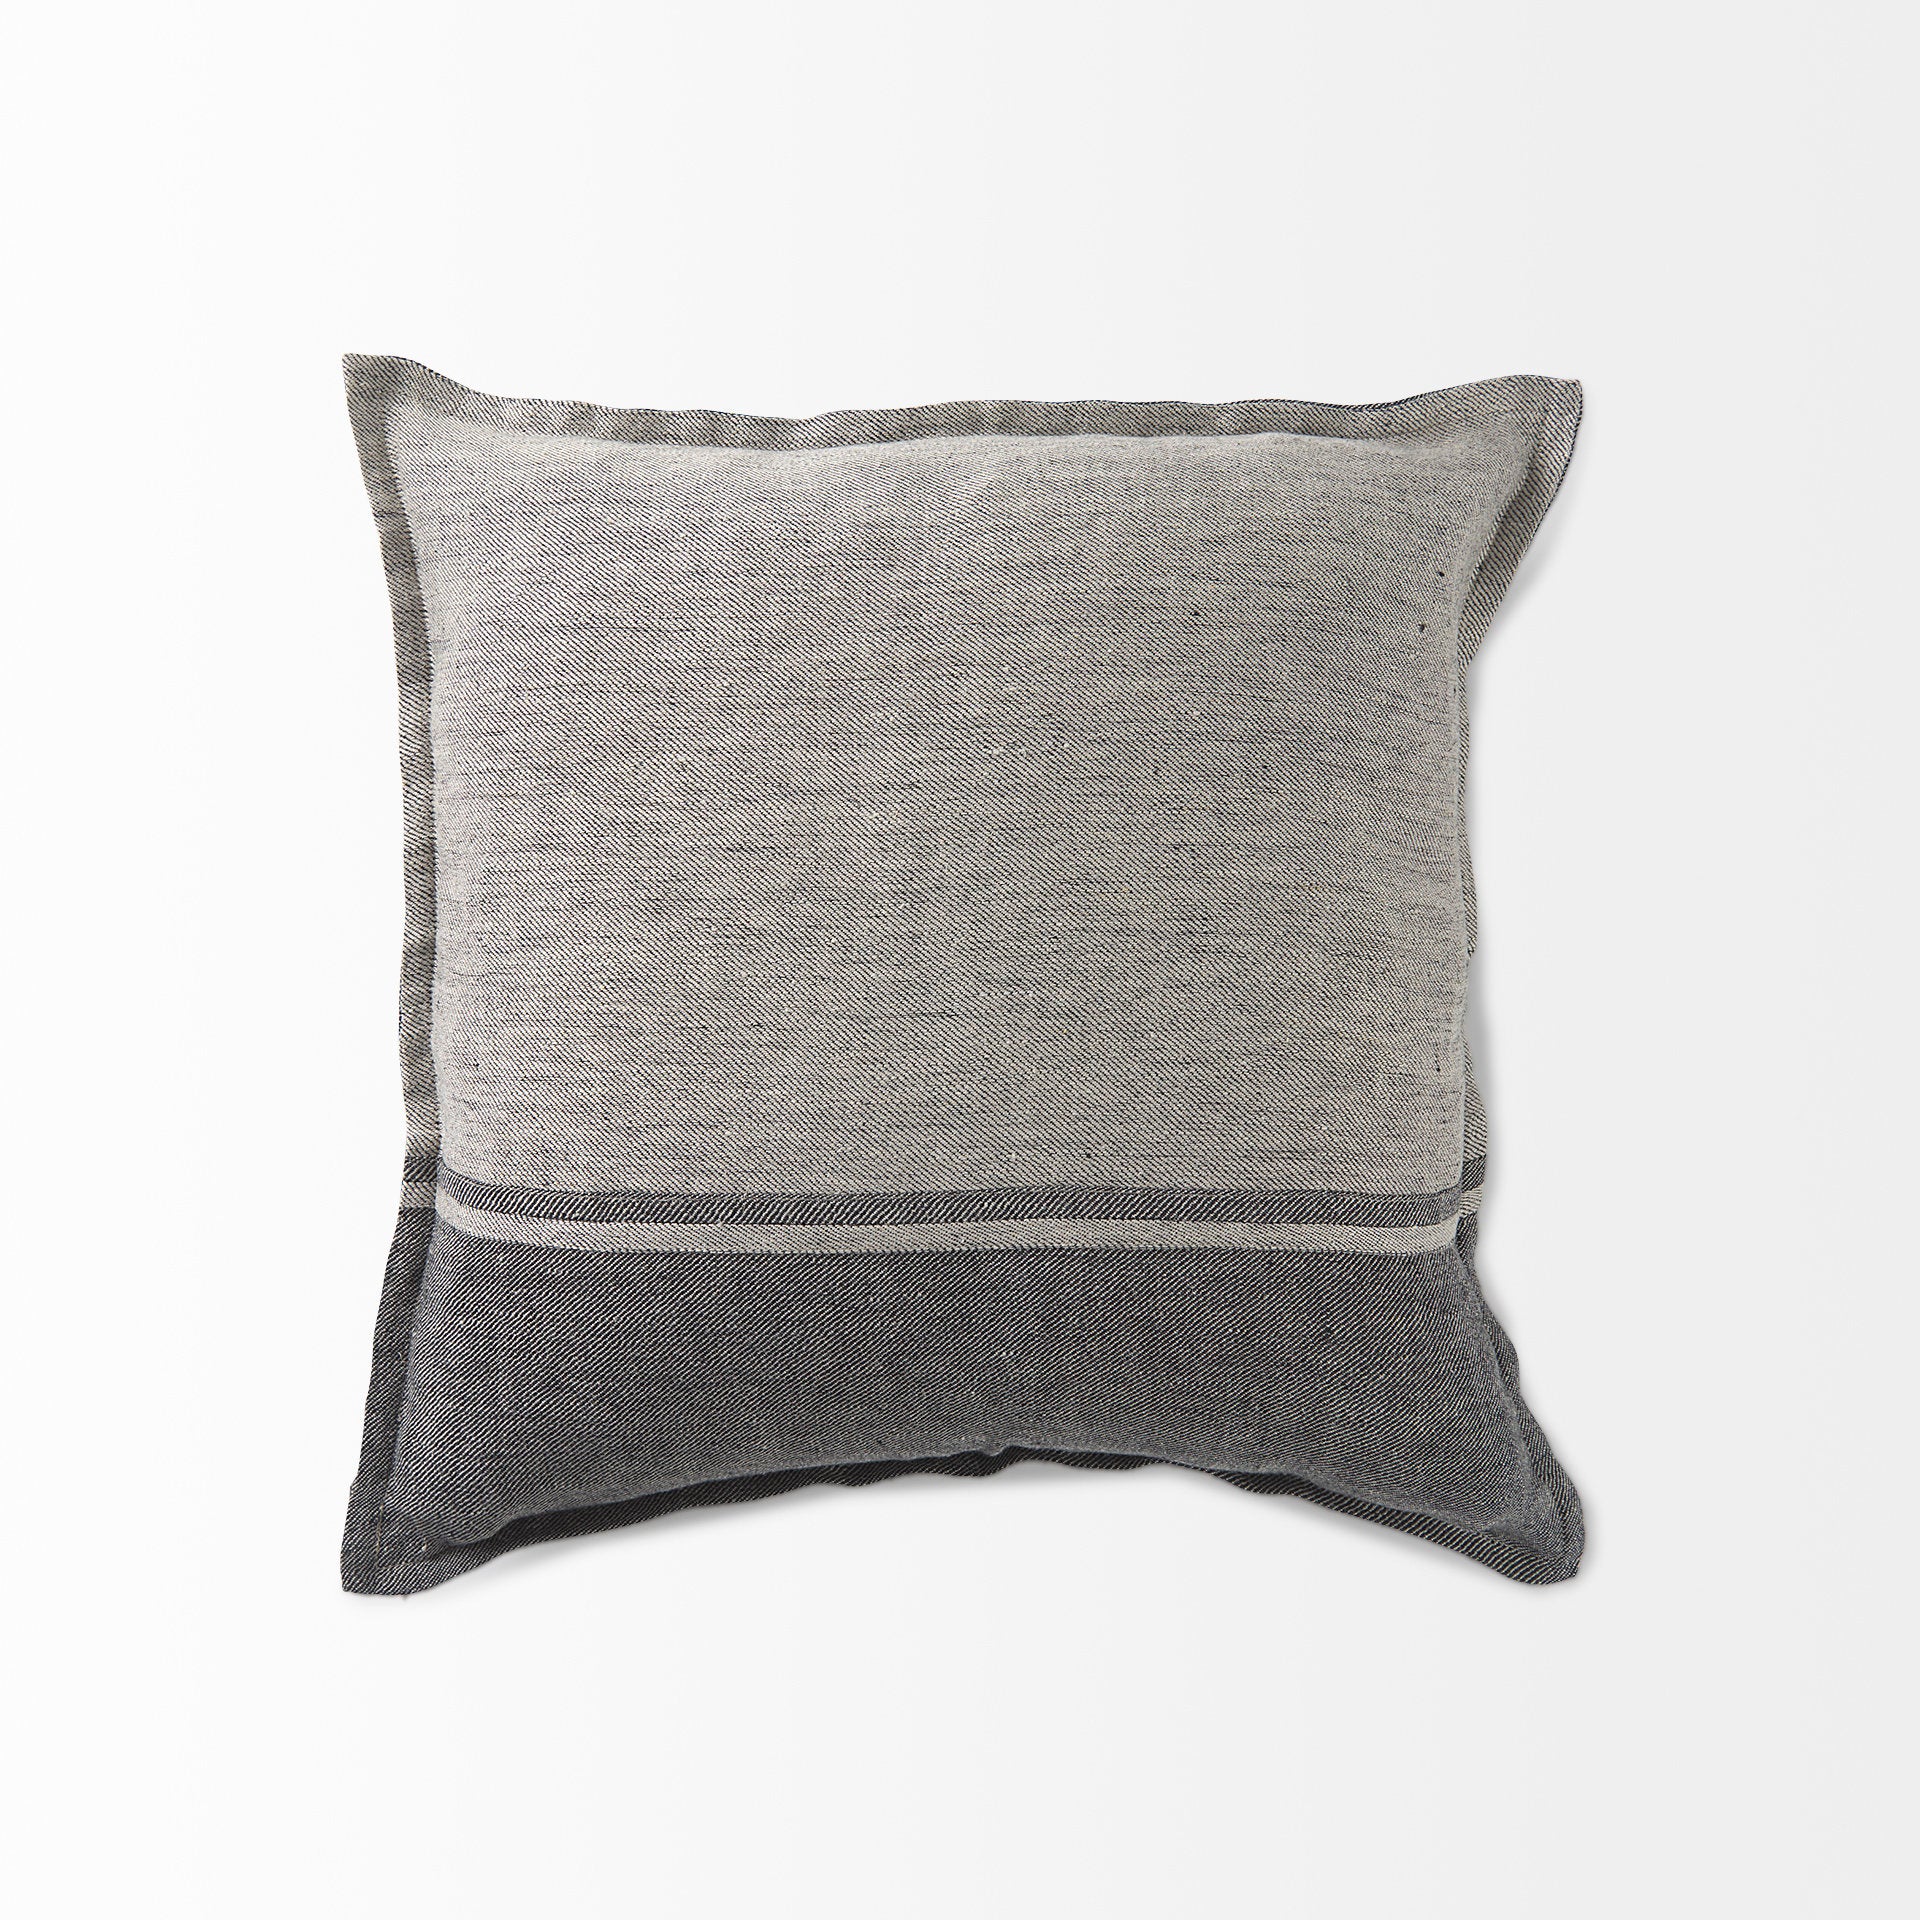 Zadie Pillow Cover